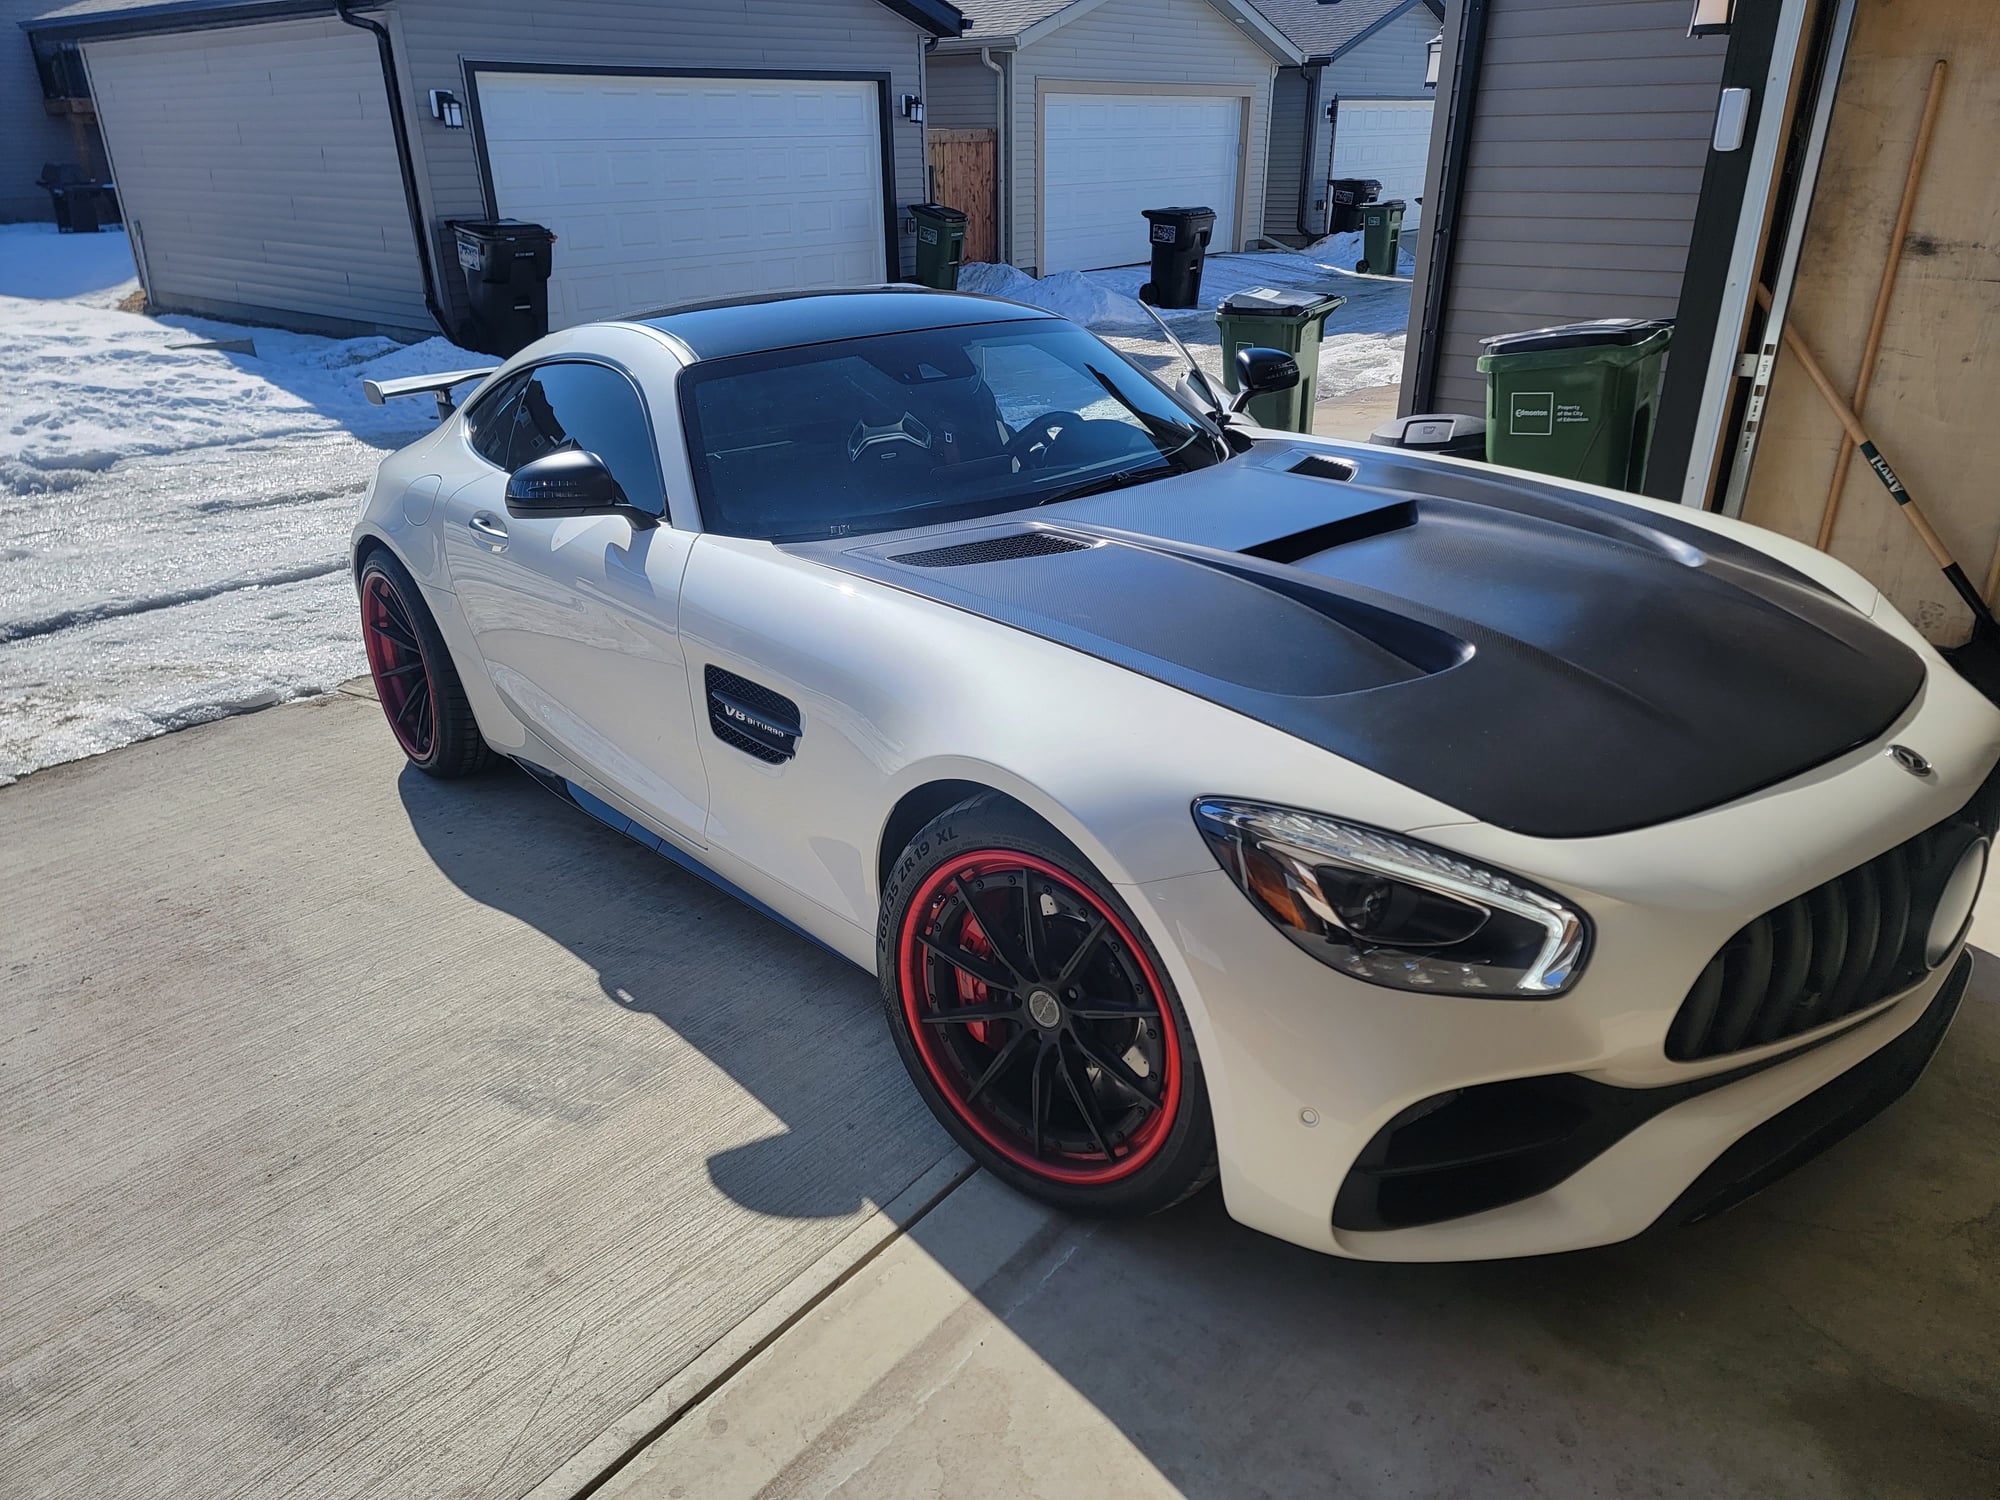 Exterior Body Parts - CMST Tuning Carbon Fiber Hood Black Series Style for Mercedes Benz C190 AMG GT GTS GT - Used - 2018 to 2021 Mercedes-Benz AMG GT C - 2018 to 2021 Mercedes-Benz AMG GT R - 2015 to 2021 Mercedes-Benz AMG GT S - Edmonton, AB T6W 4J, Canada